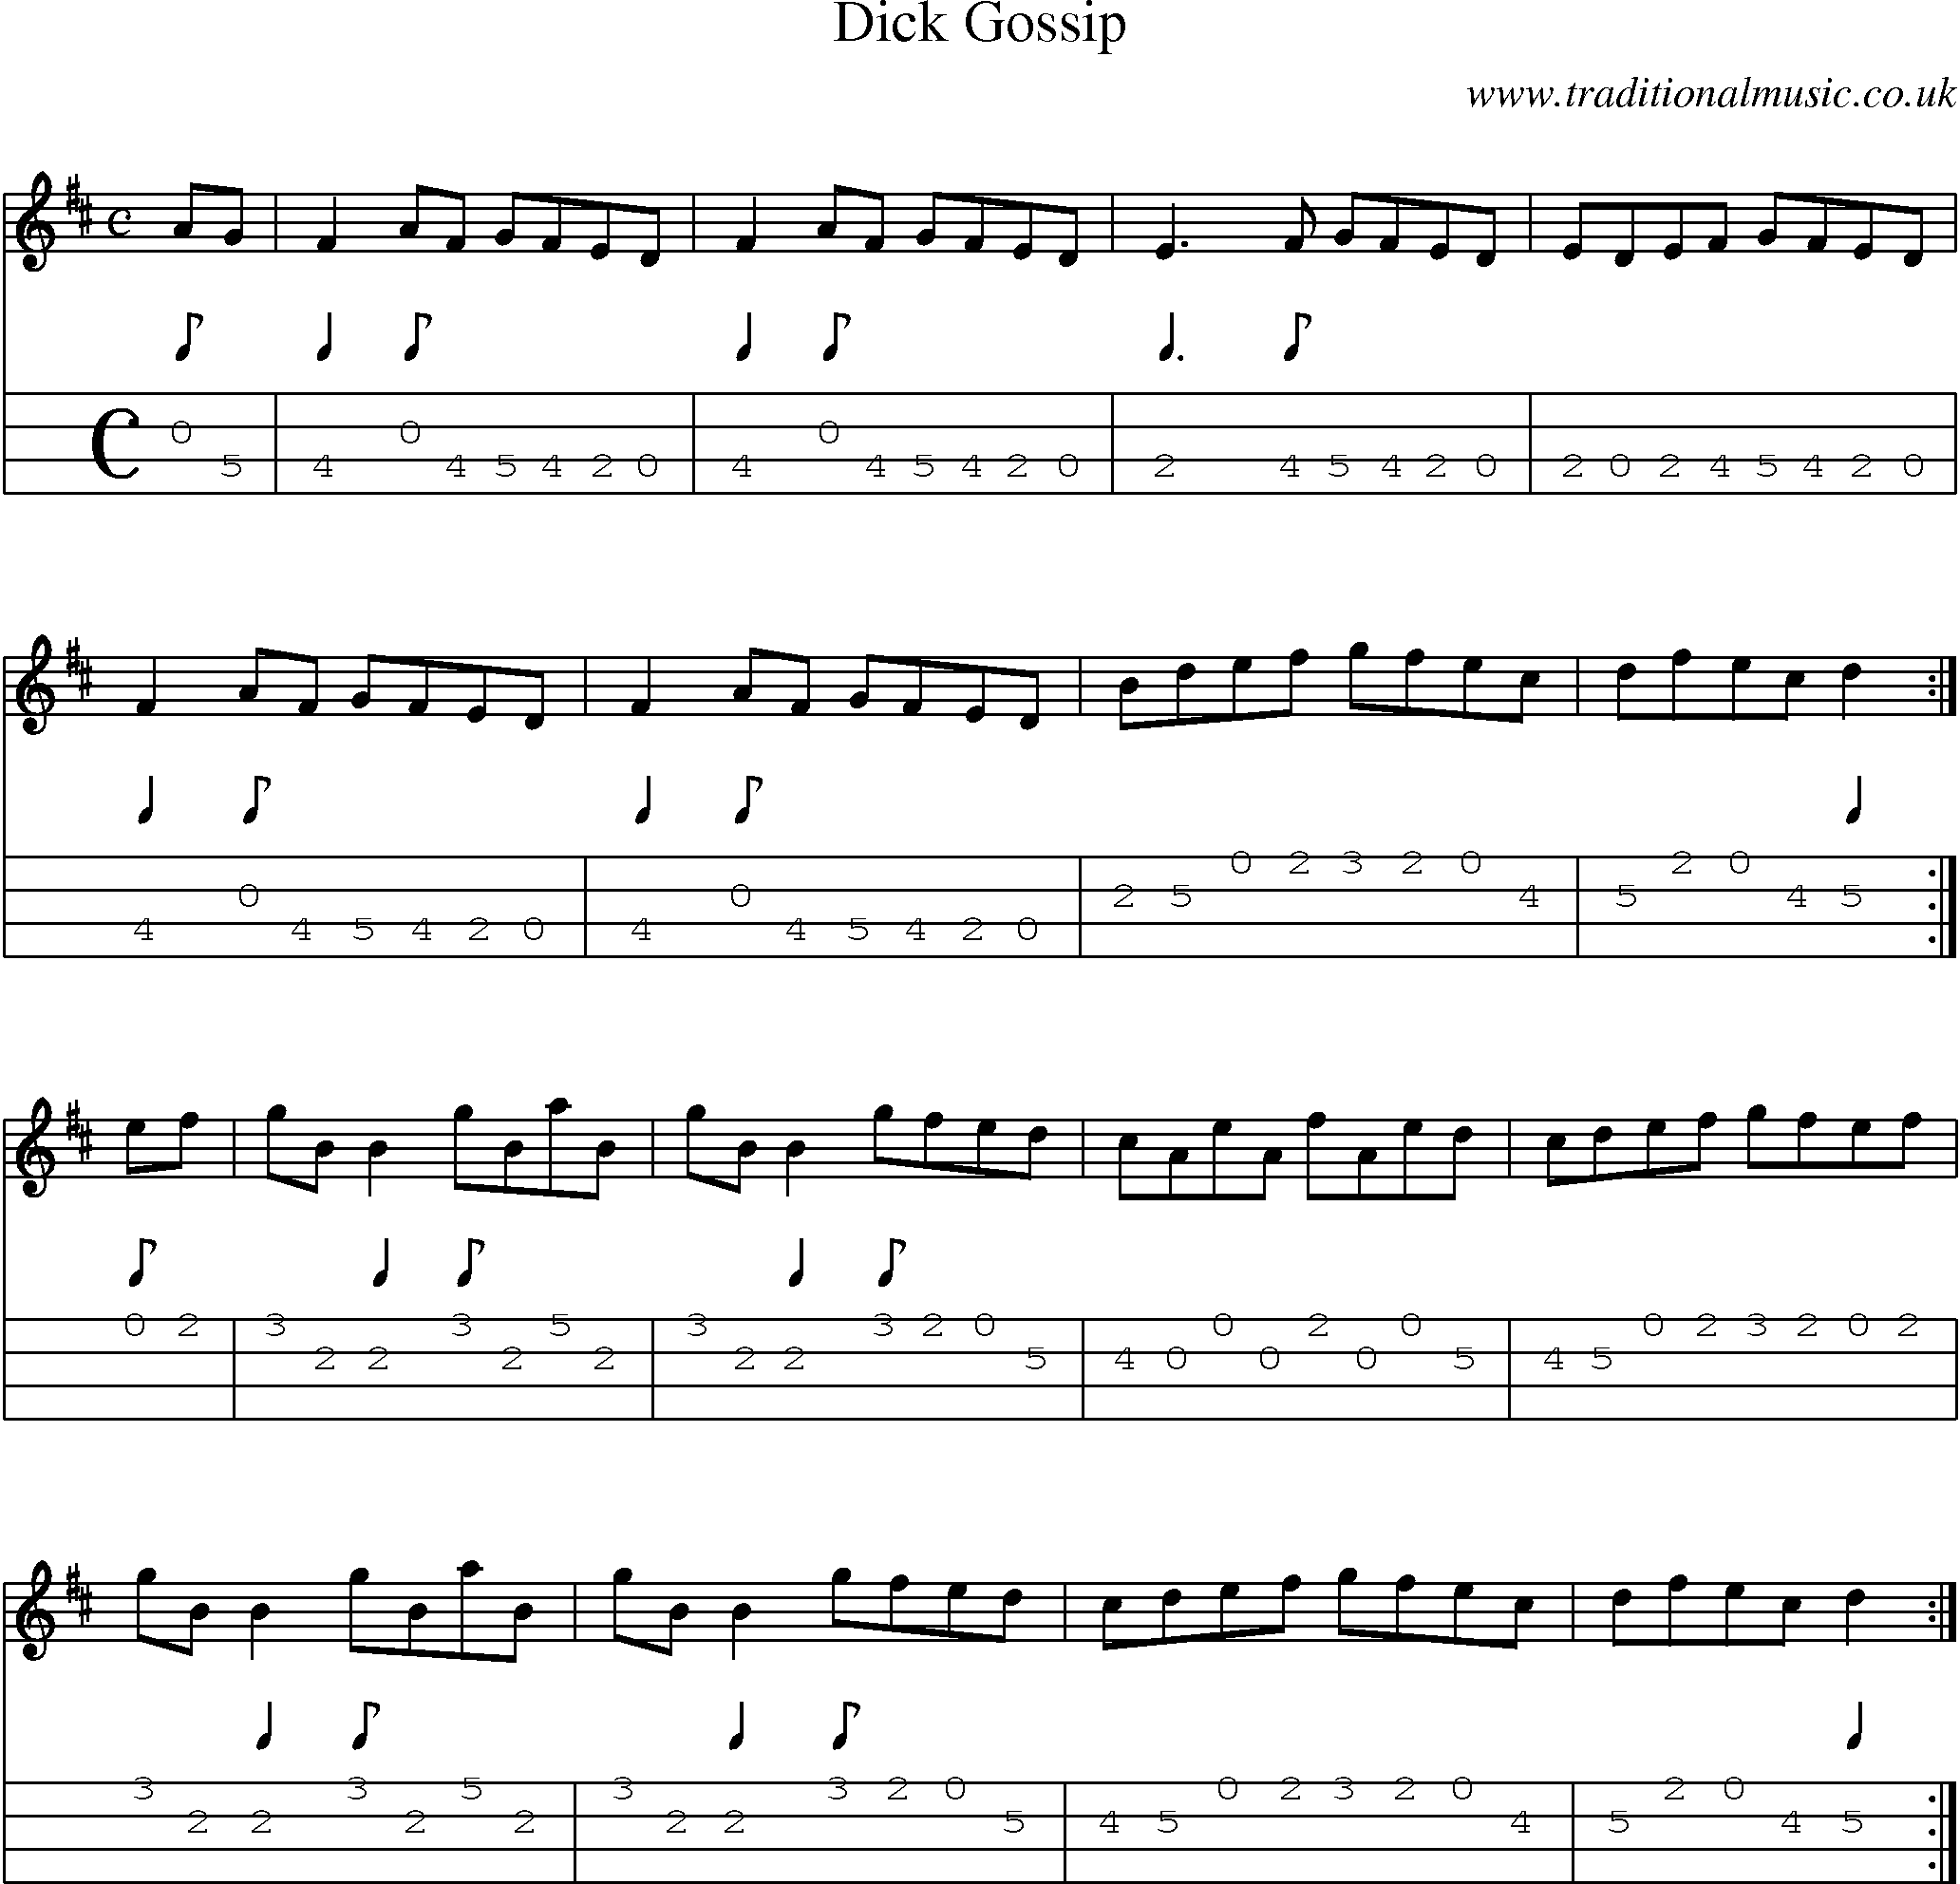 Music Score and Mandolin Tabs for Dick Gossip